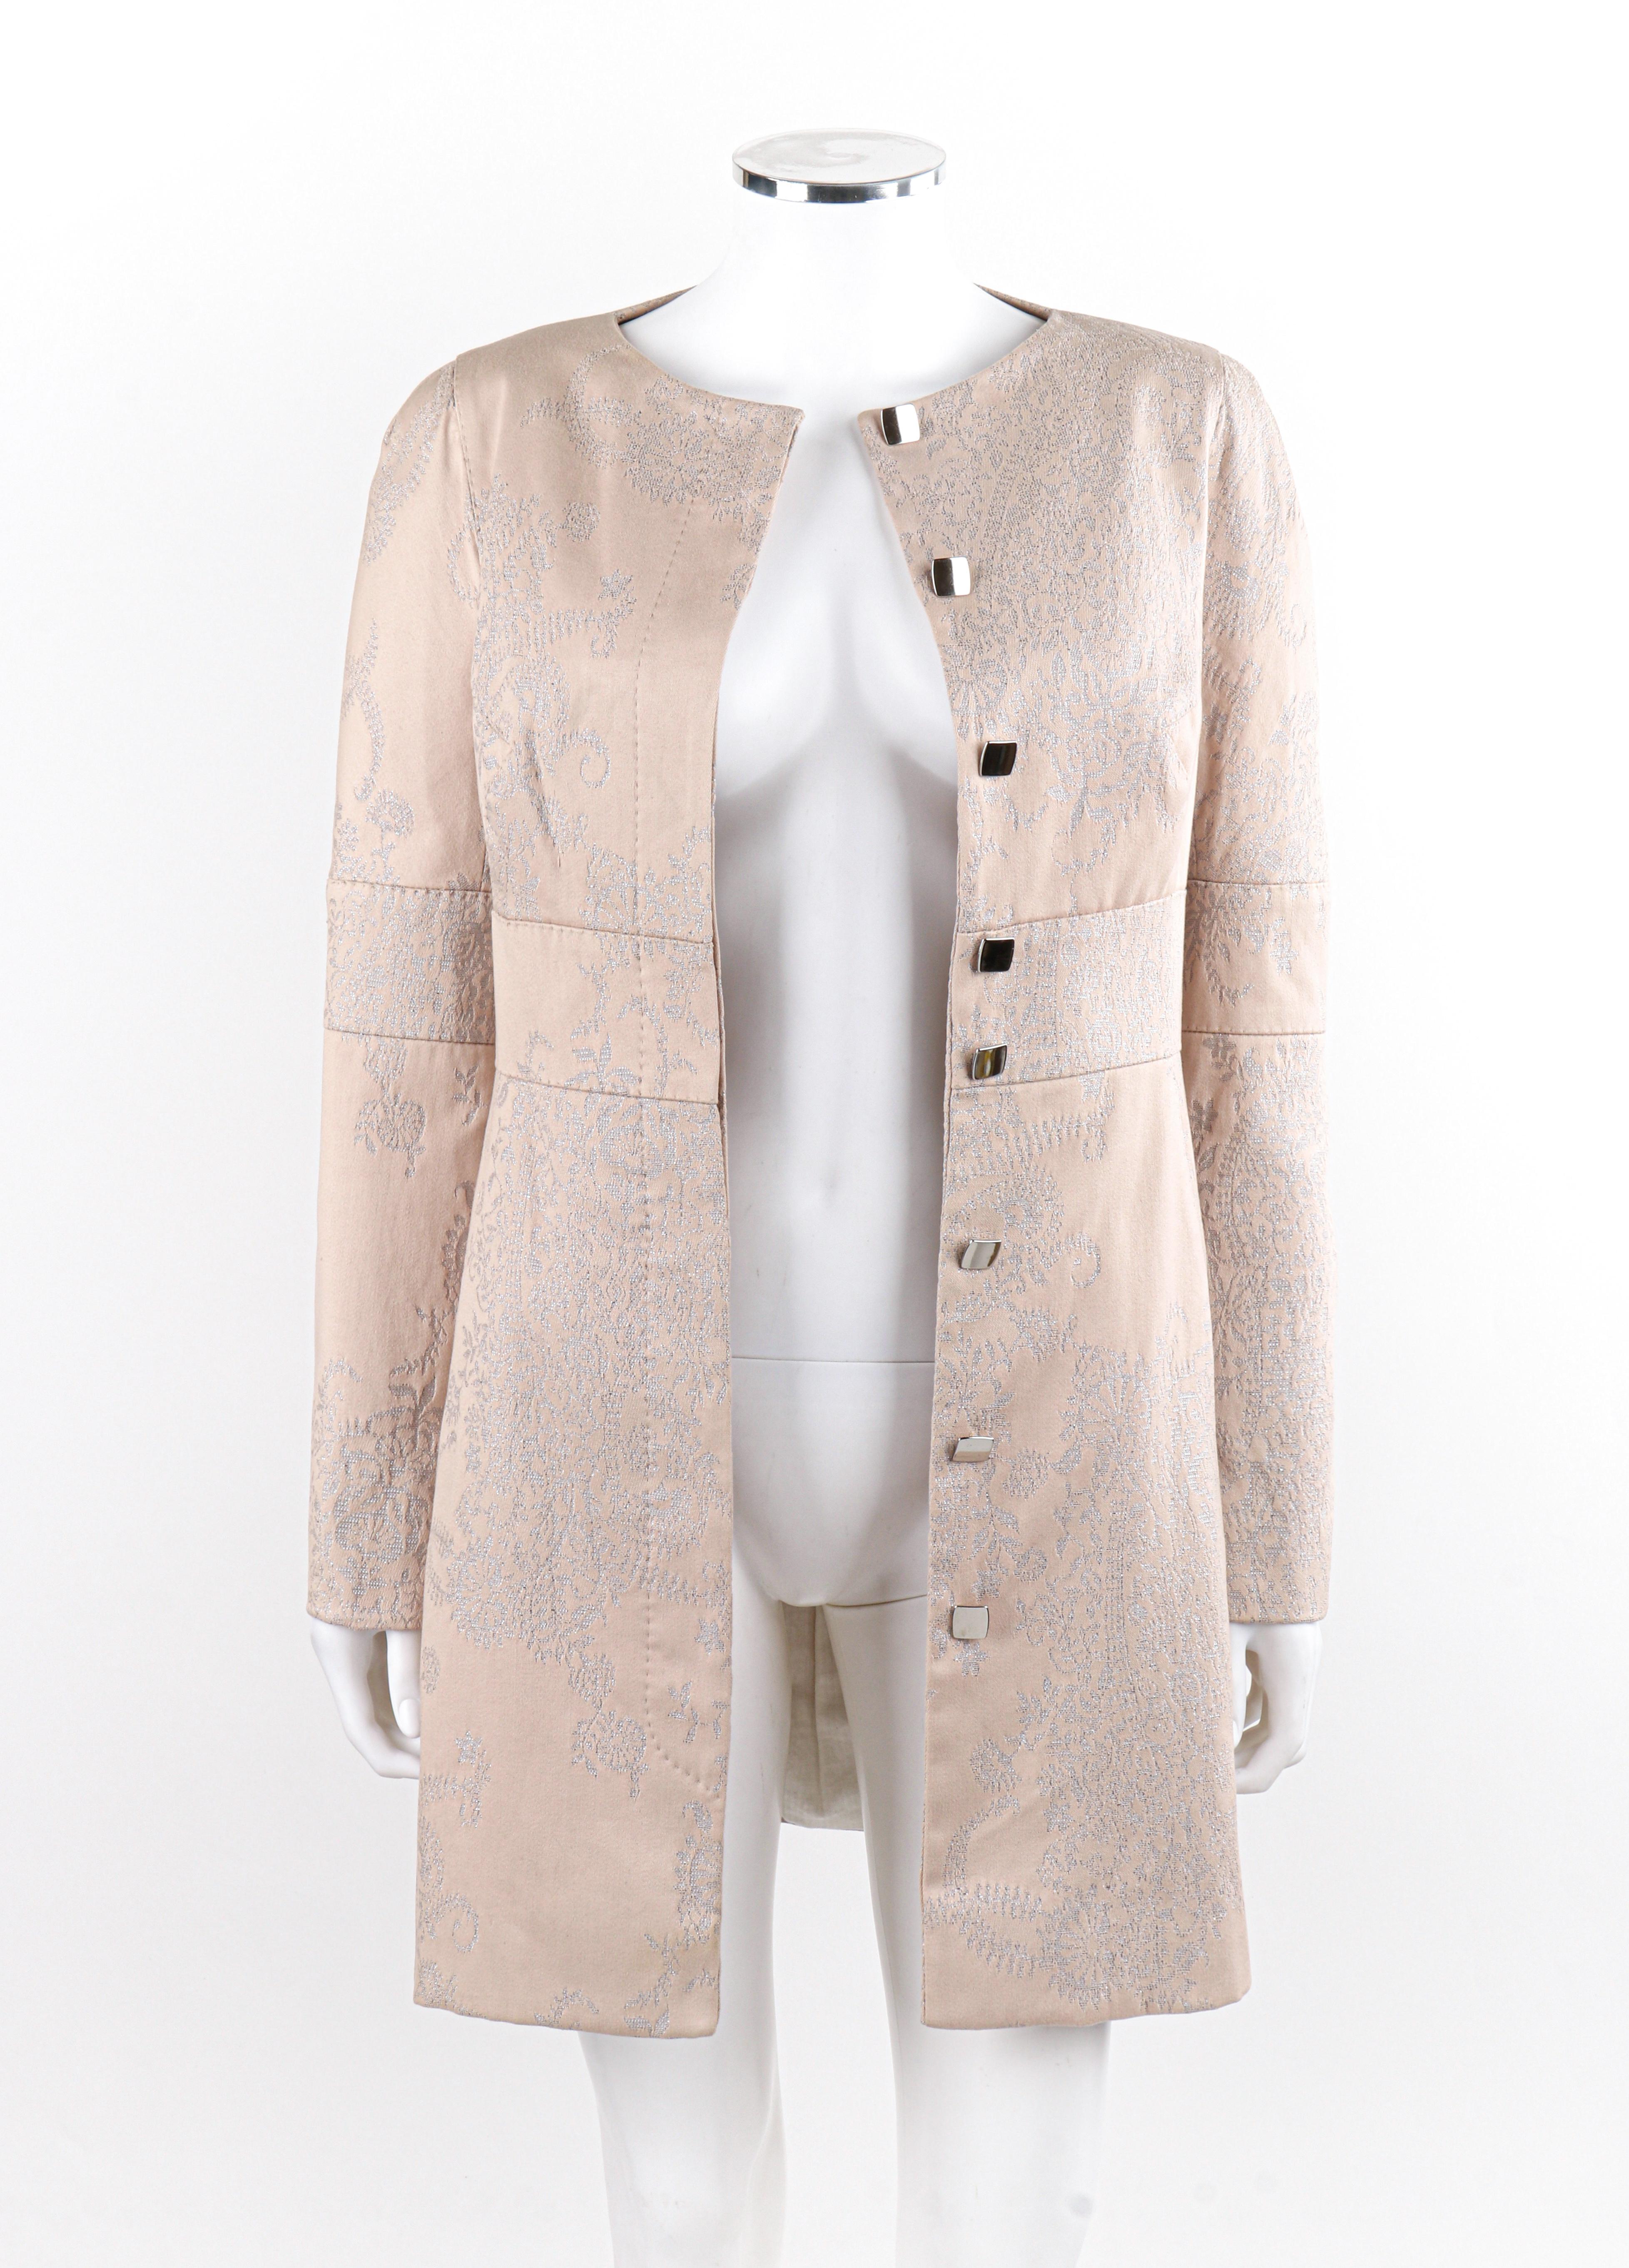 ALEXANDER McQUEEN A/W 2004 “Pantheom as Lecum” Pink Metallic Embroidered Coat For Sale 3